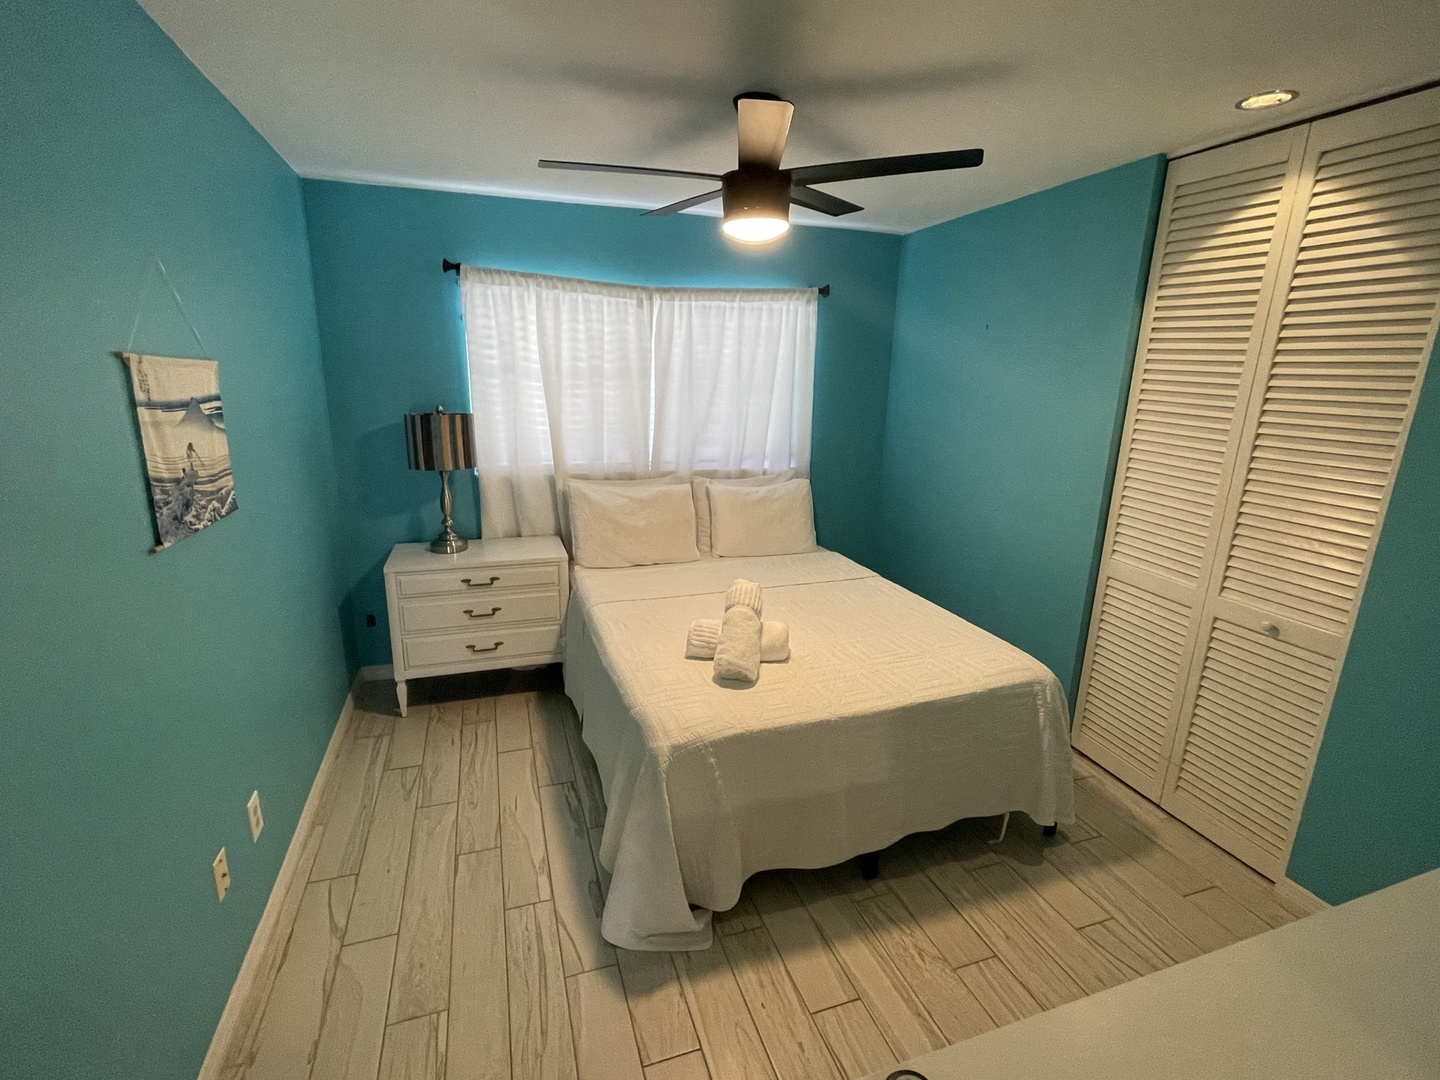 The final bedroom offers a plush queen bed & ceiling fan